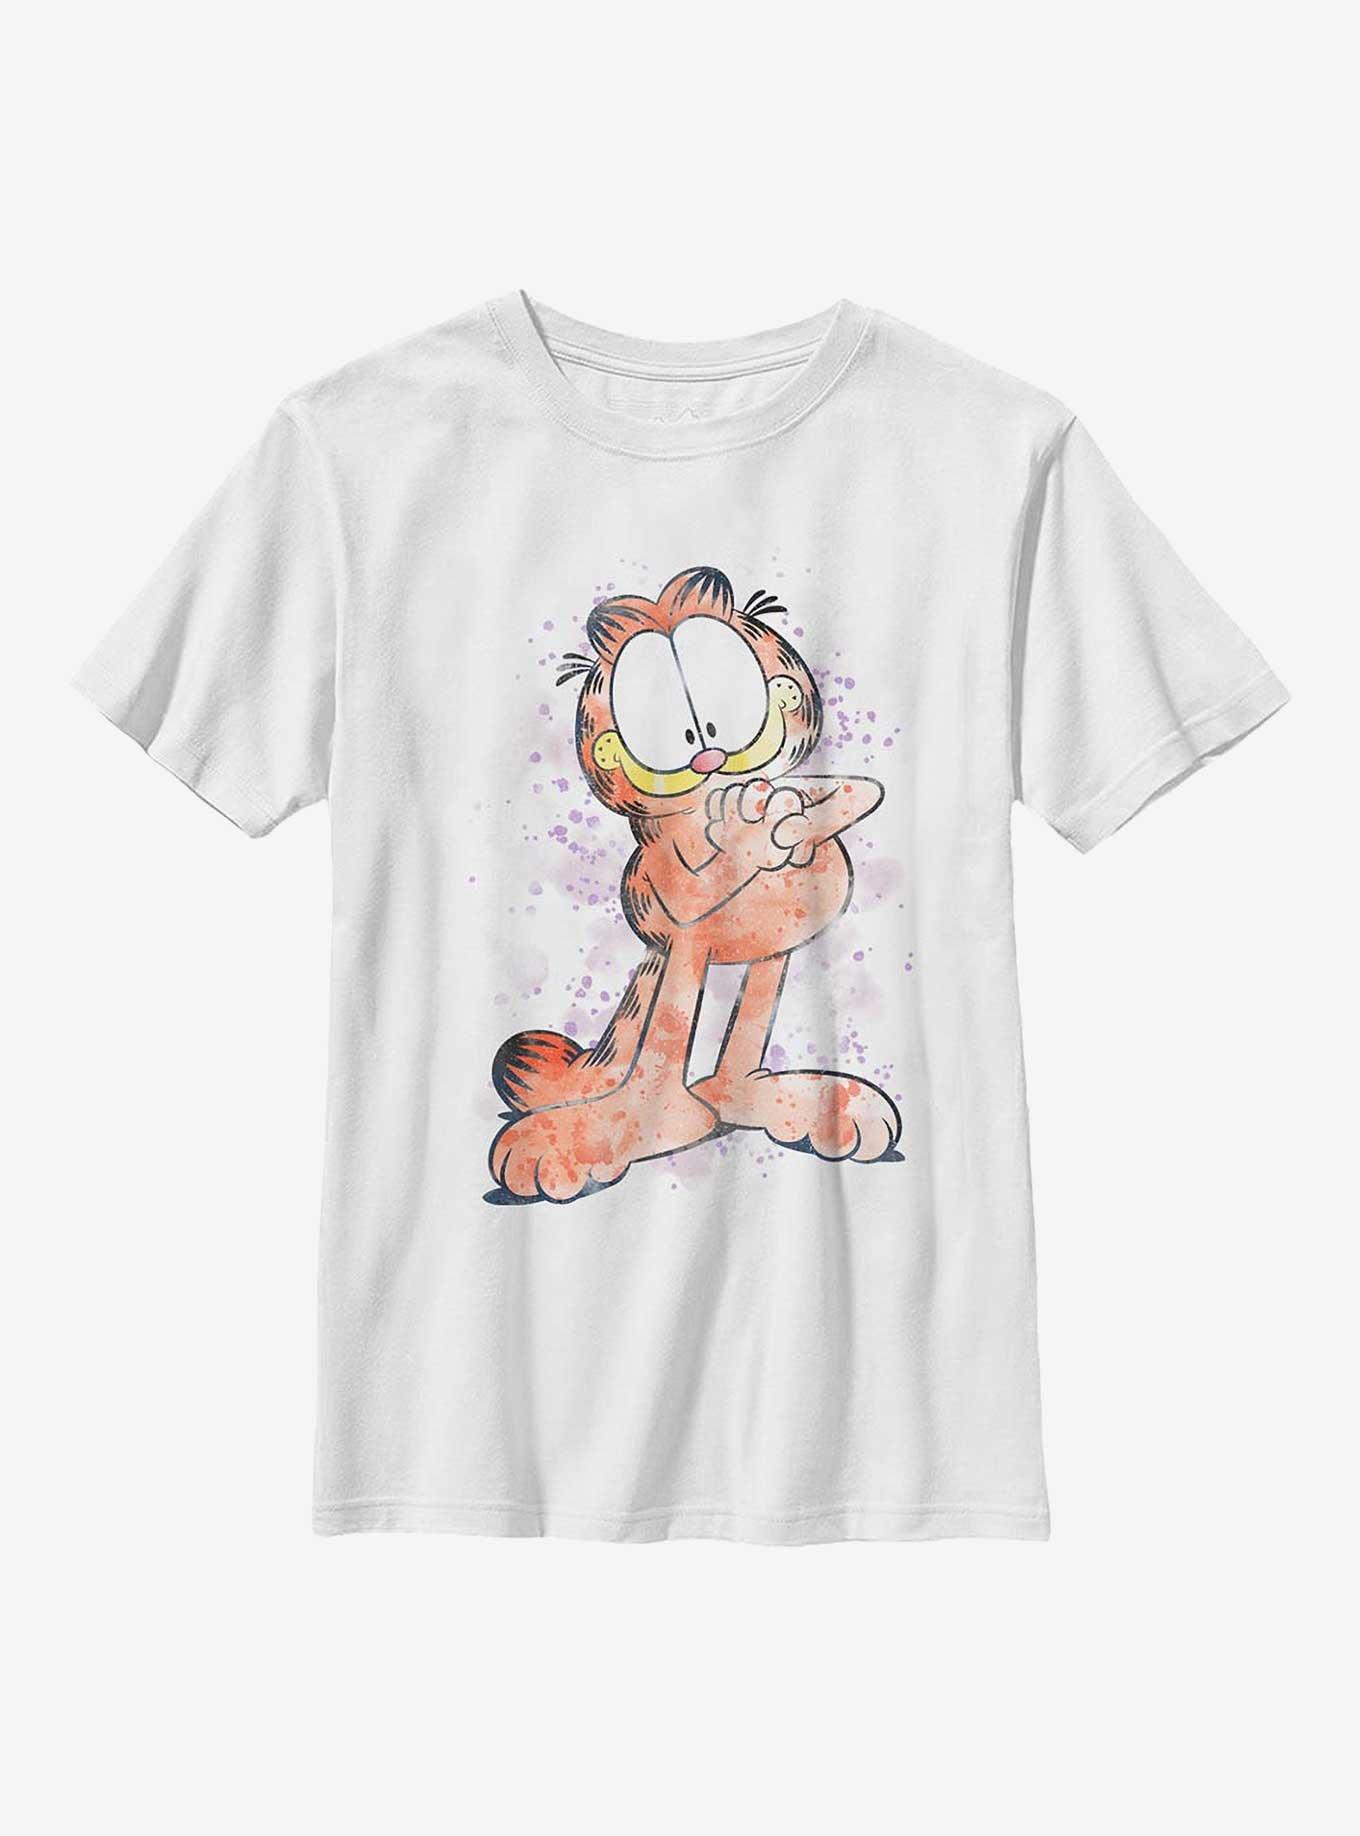 Garfield Watercolor Tabby Youth T-Shirt, WHITE, hi-res